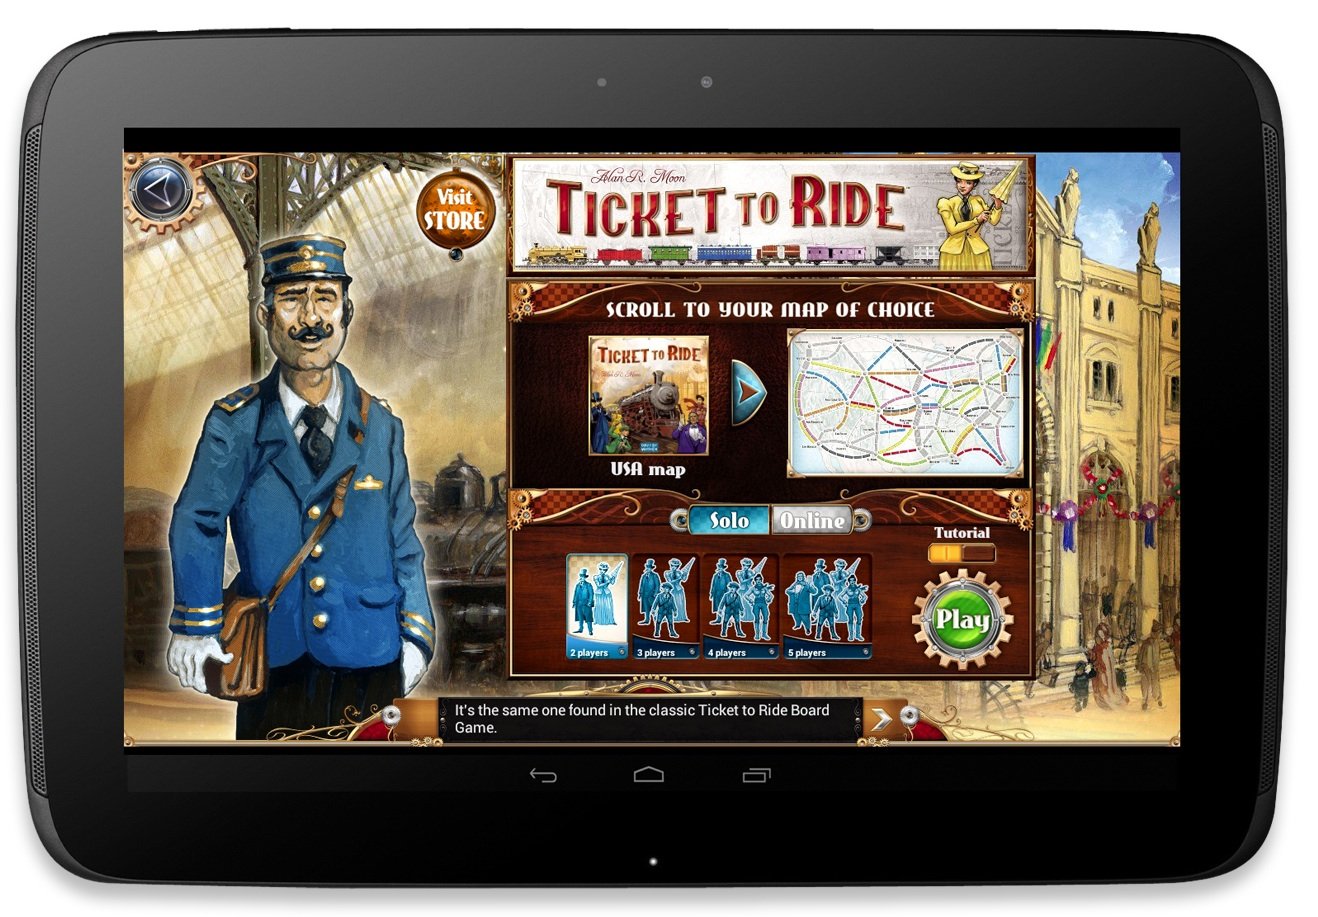 Ticket to Ride for Android arrives on the Google Play Store.